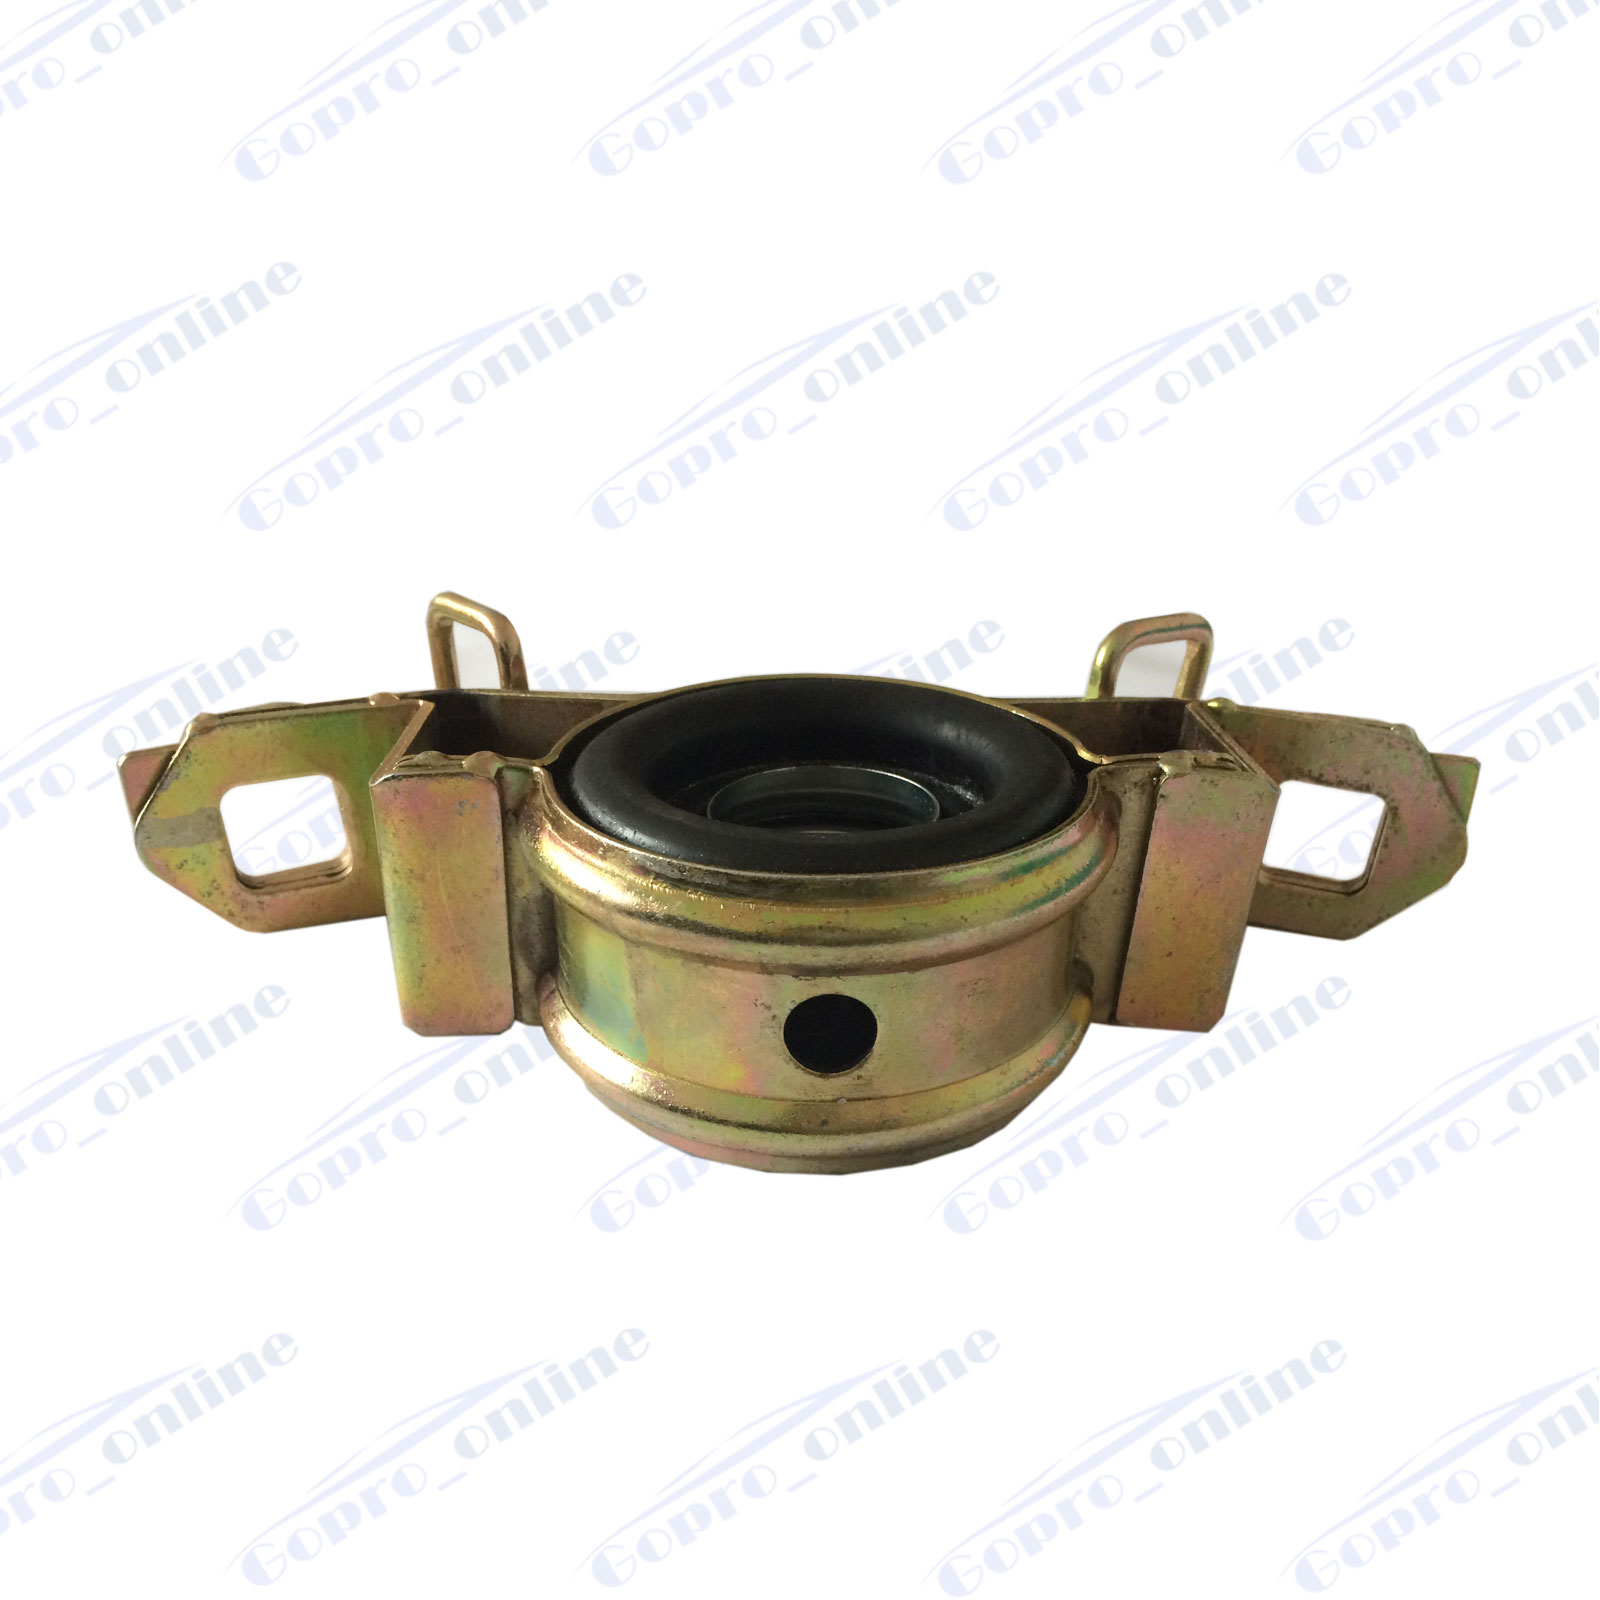 Toyota pickup carrier bearing replacement